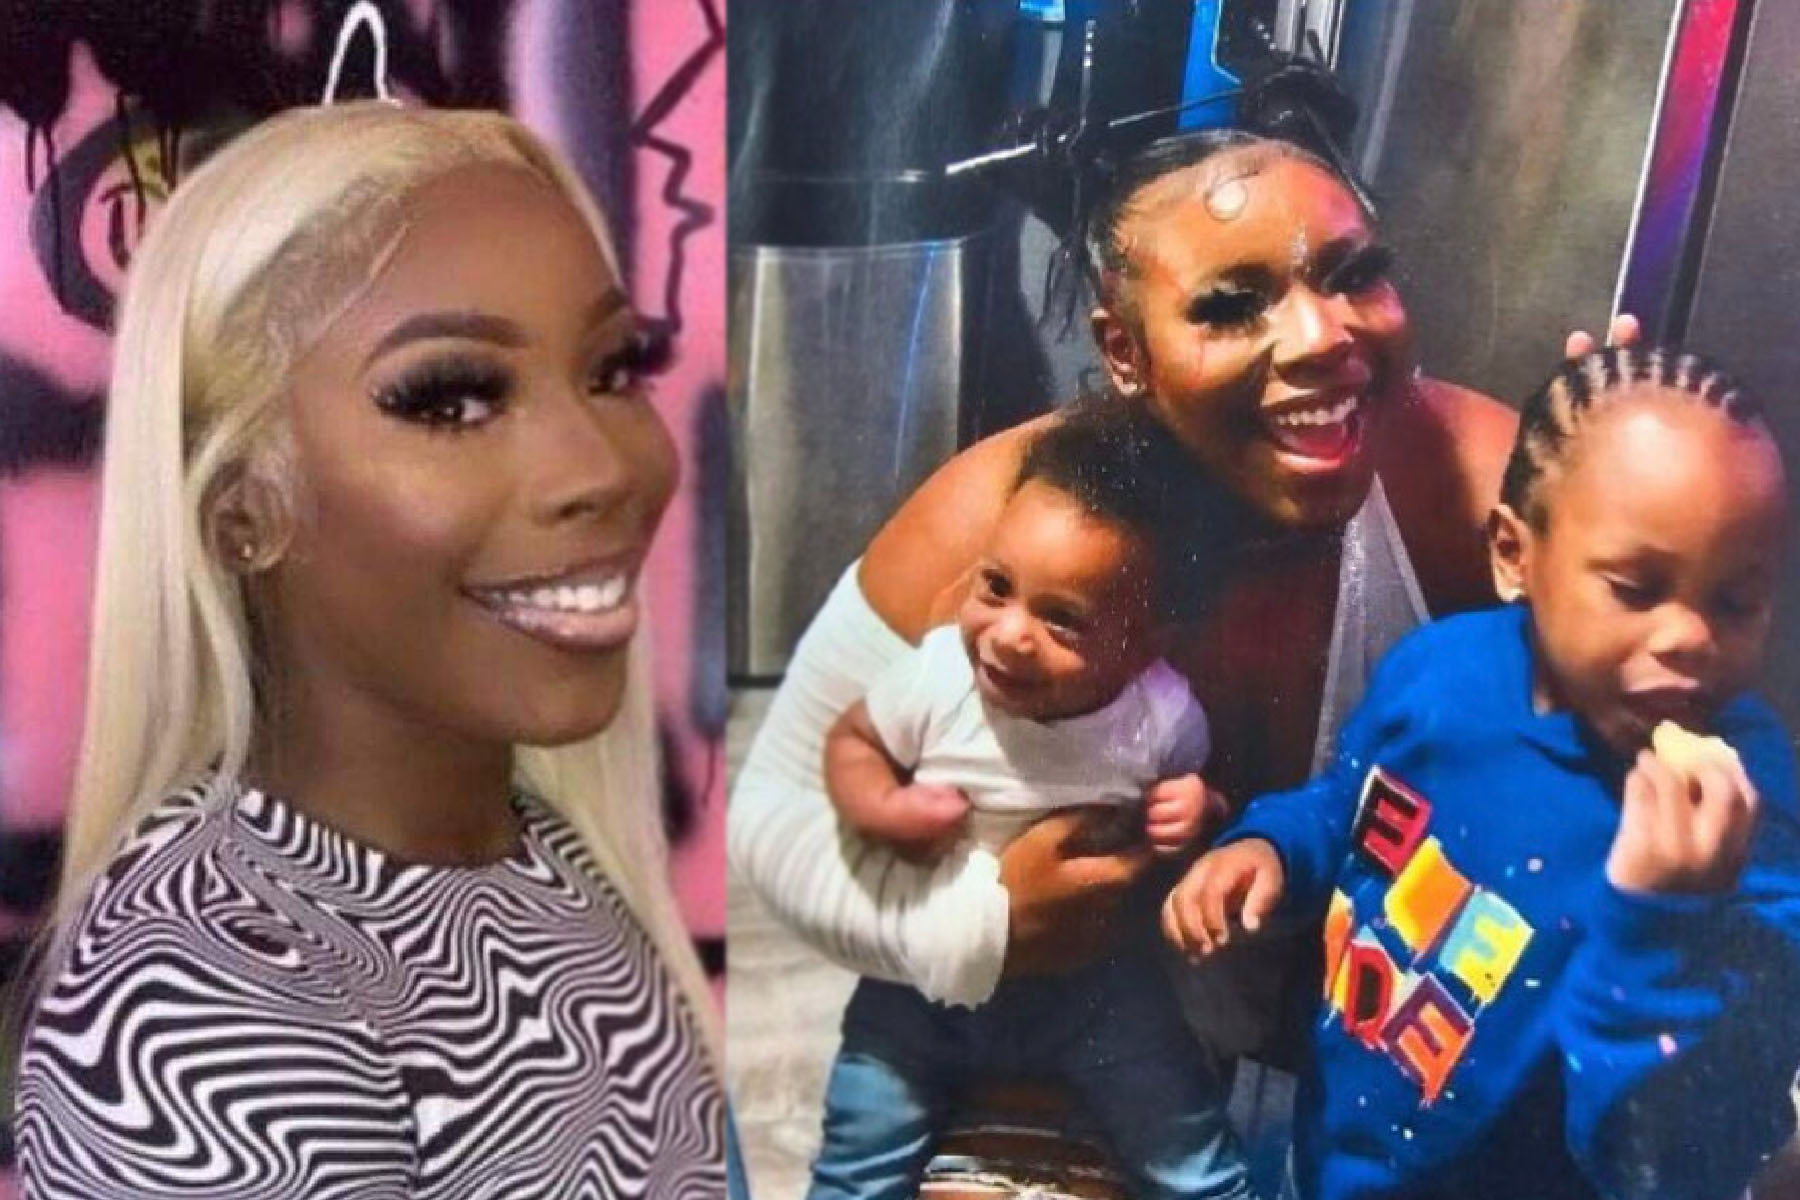 diptych of two images of Ta’Kiya Young. On the left, a smiling portrait. on the right, an image of her holding her two young sons.